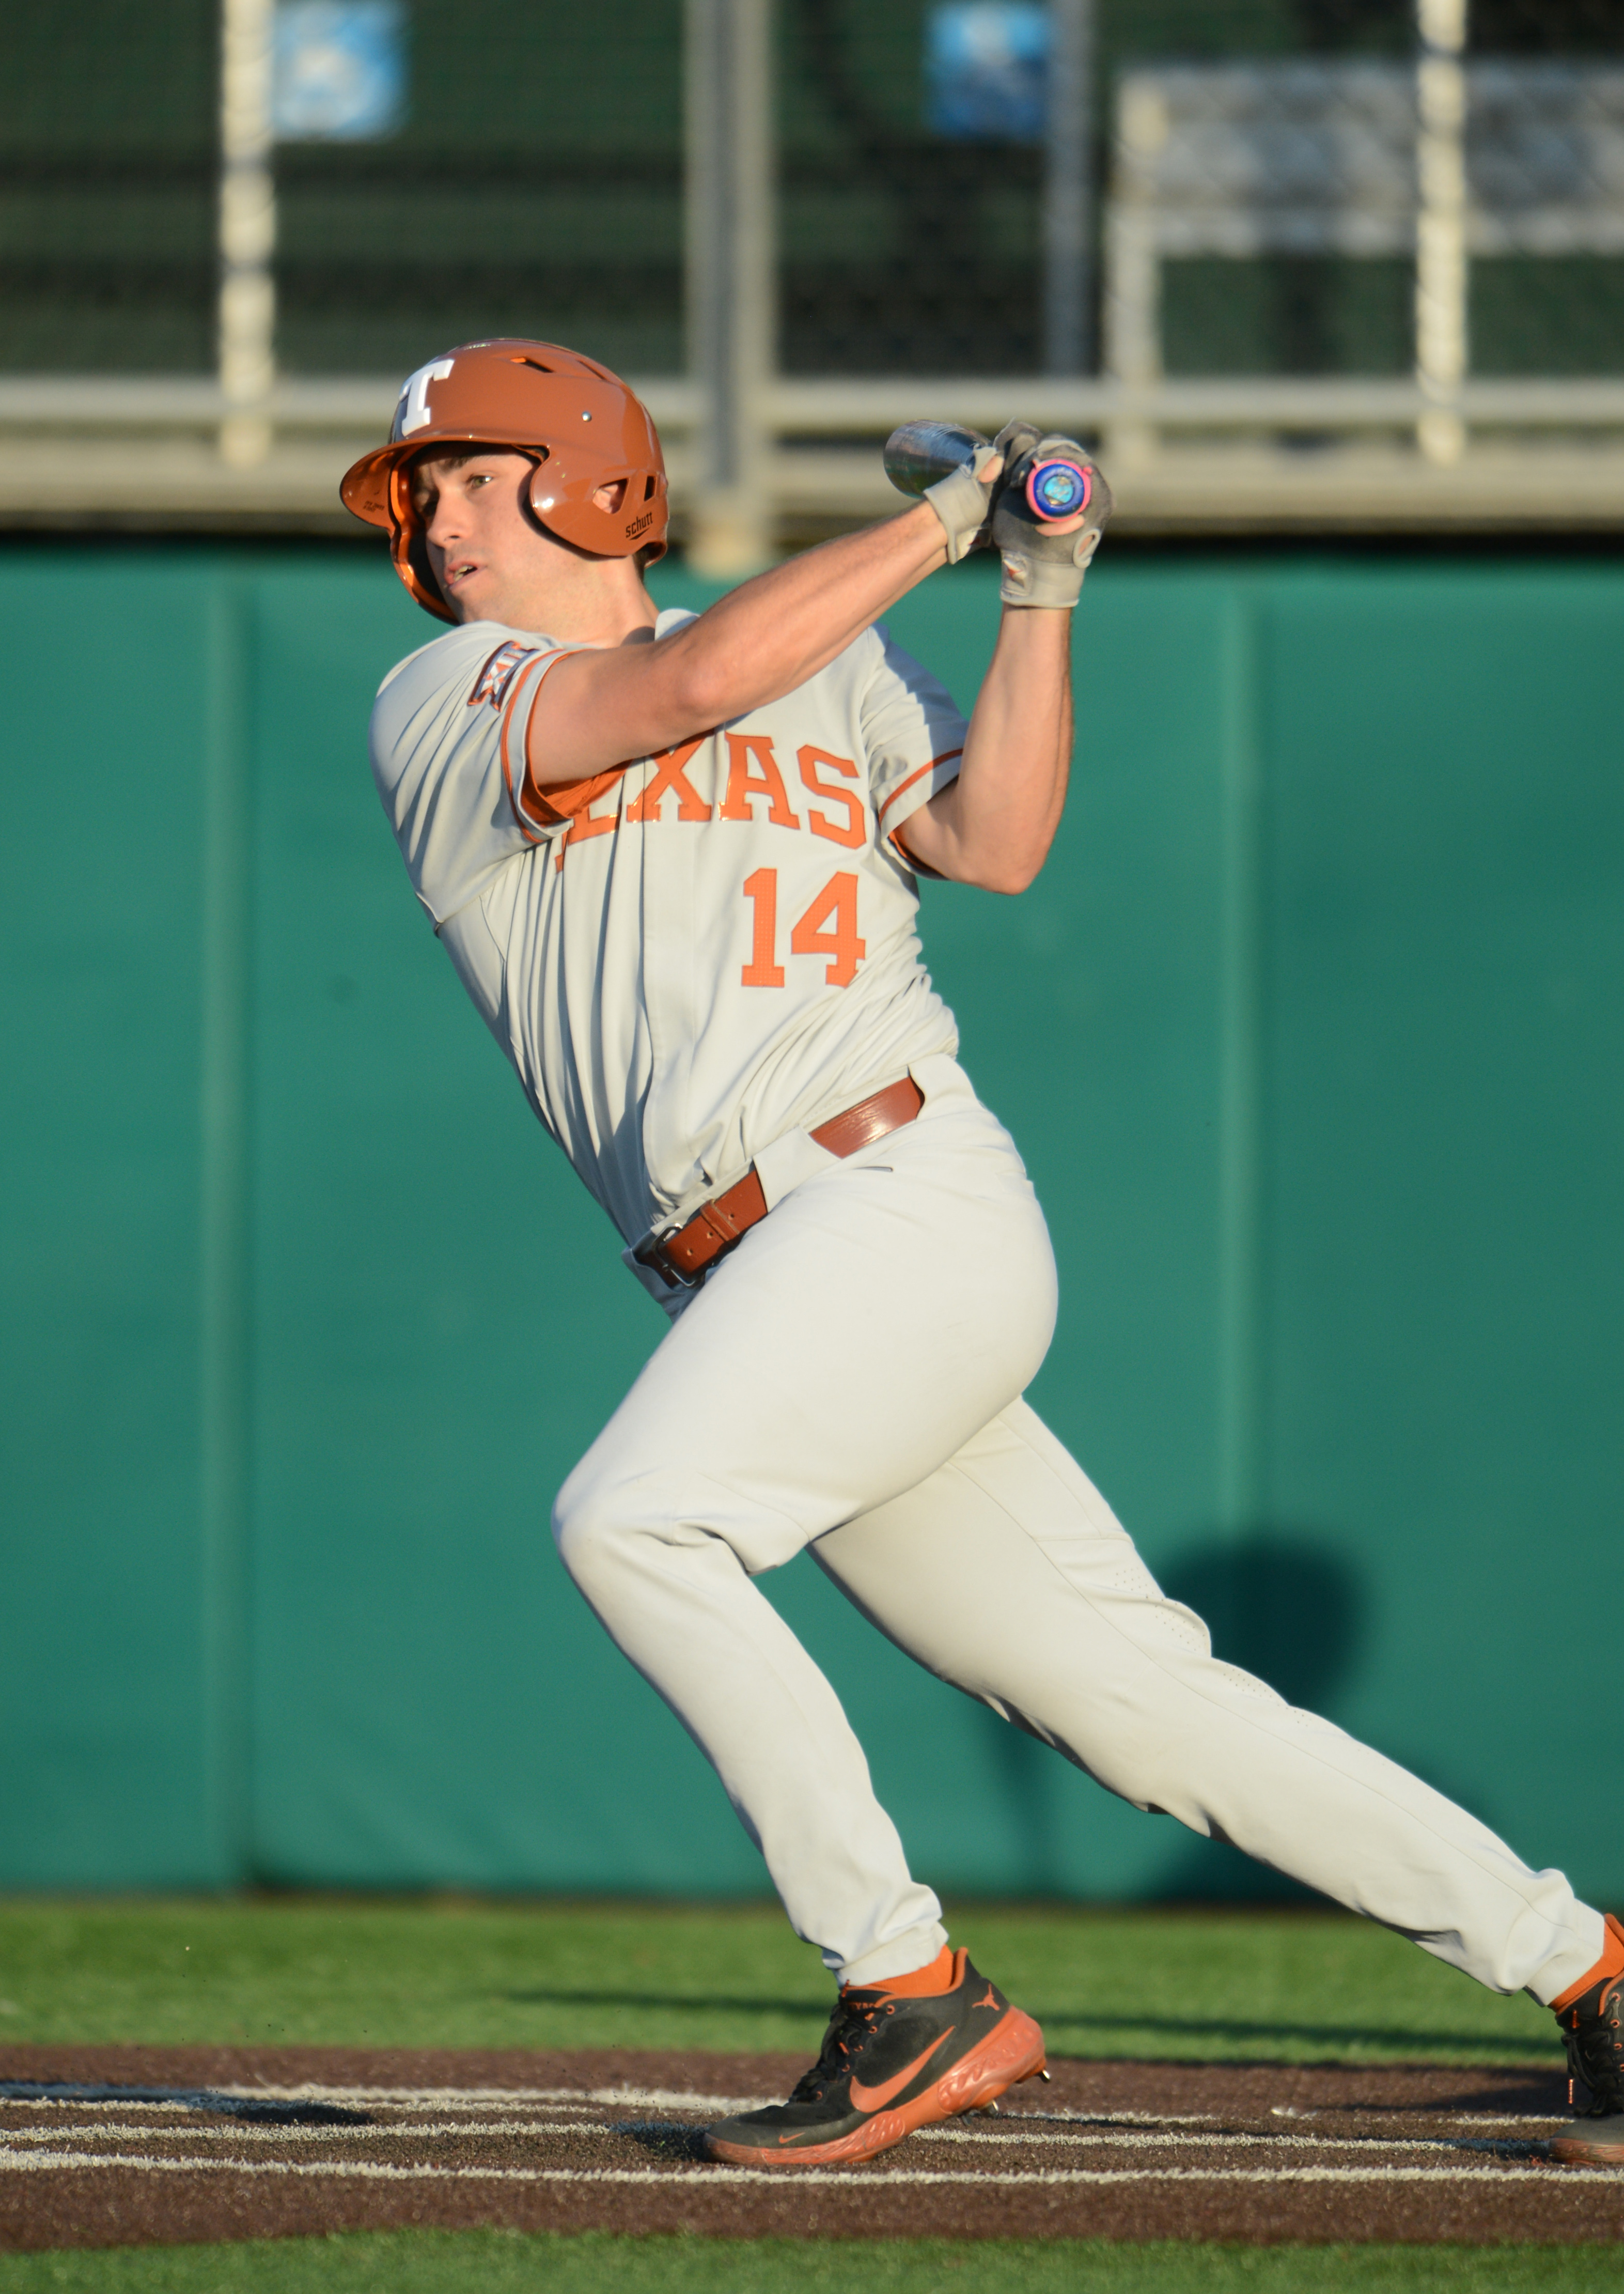 Texas Longhorns infielders Murphy Stehly takes a swing during game between the Texas Longhorns and the Texas State Bobcats on April 20, 2021 at Bobcat Ballpark in San Marcos, TX.